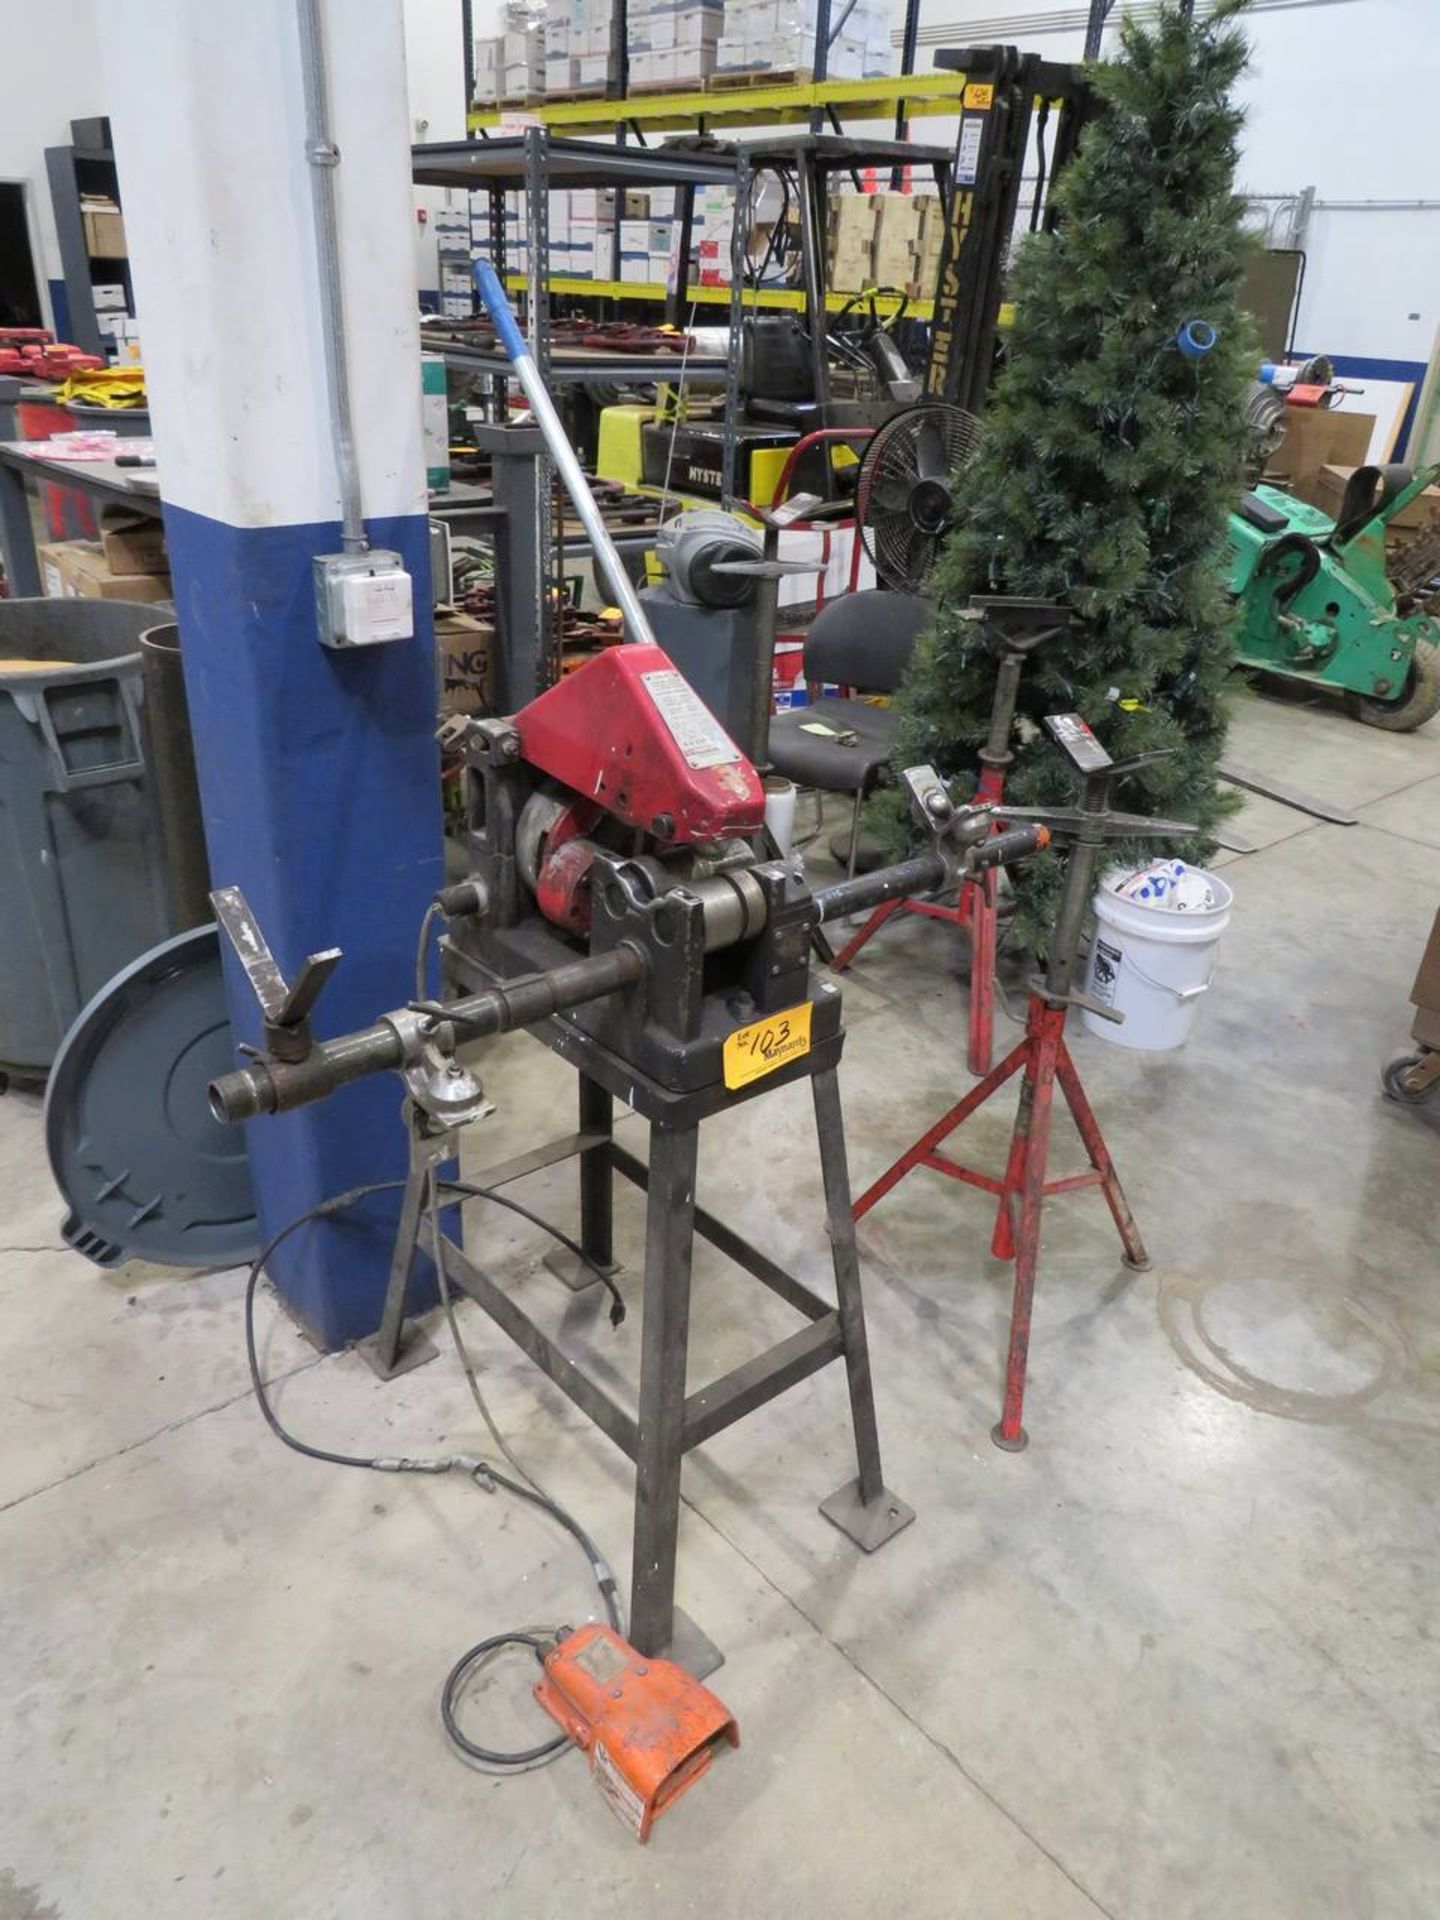 2002 Rothenberger E-Z Cutter Ridgid Pipe Stand, 115 Volt - Image 4 of 6